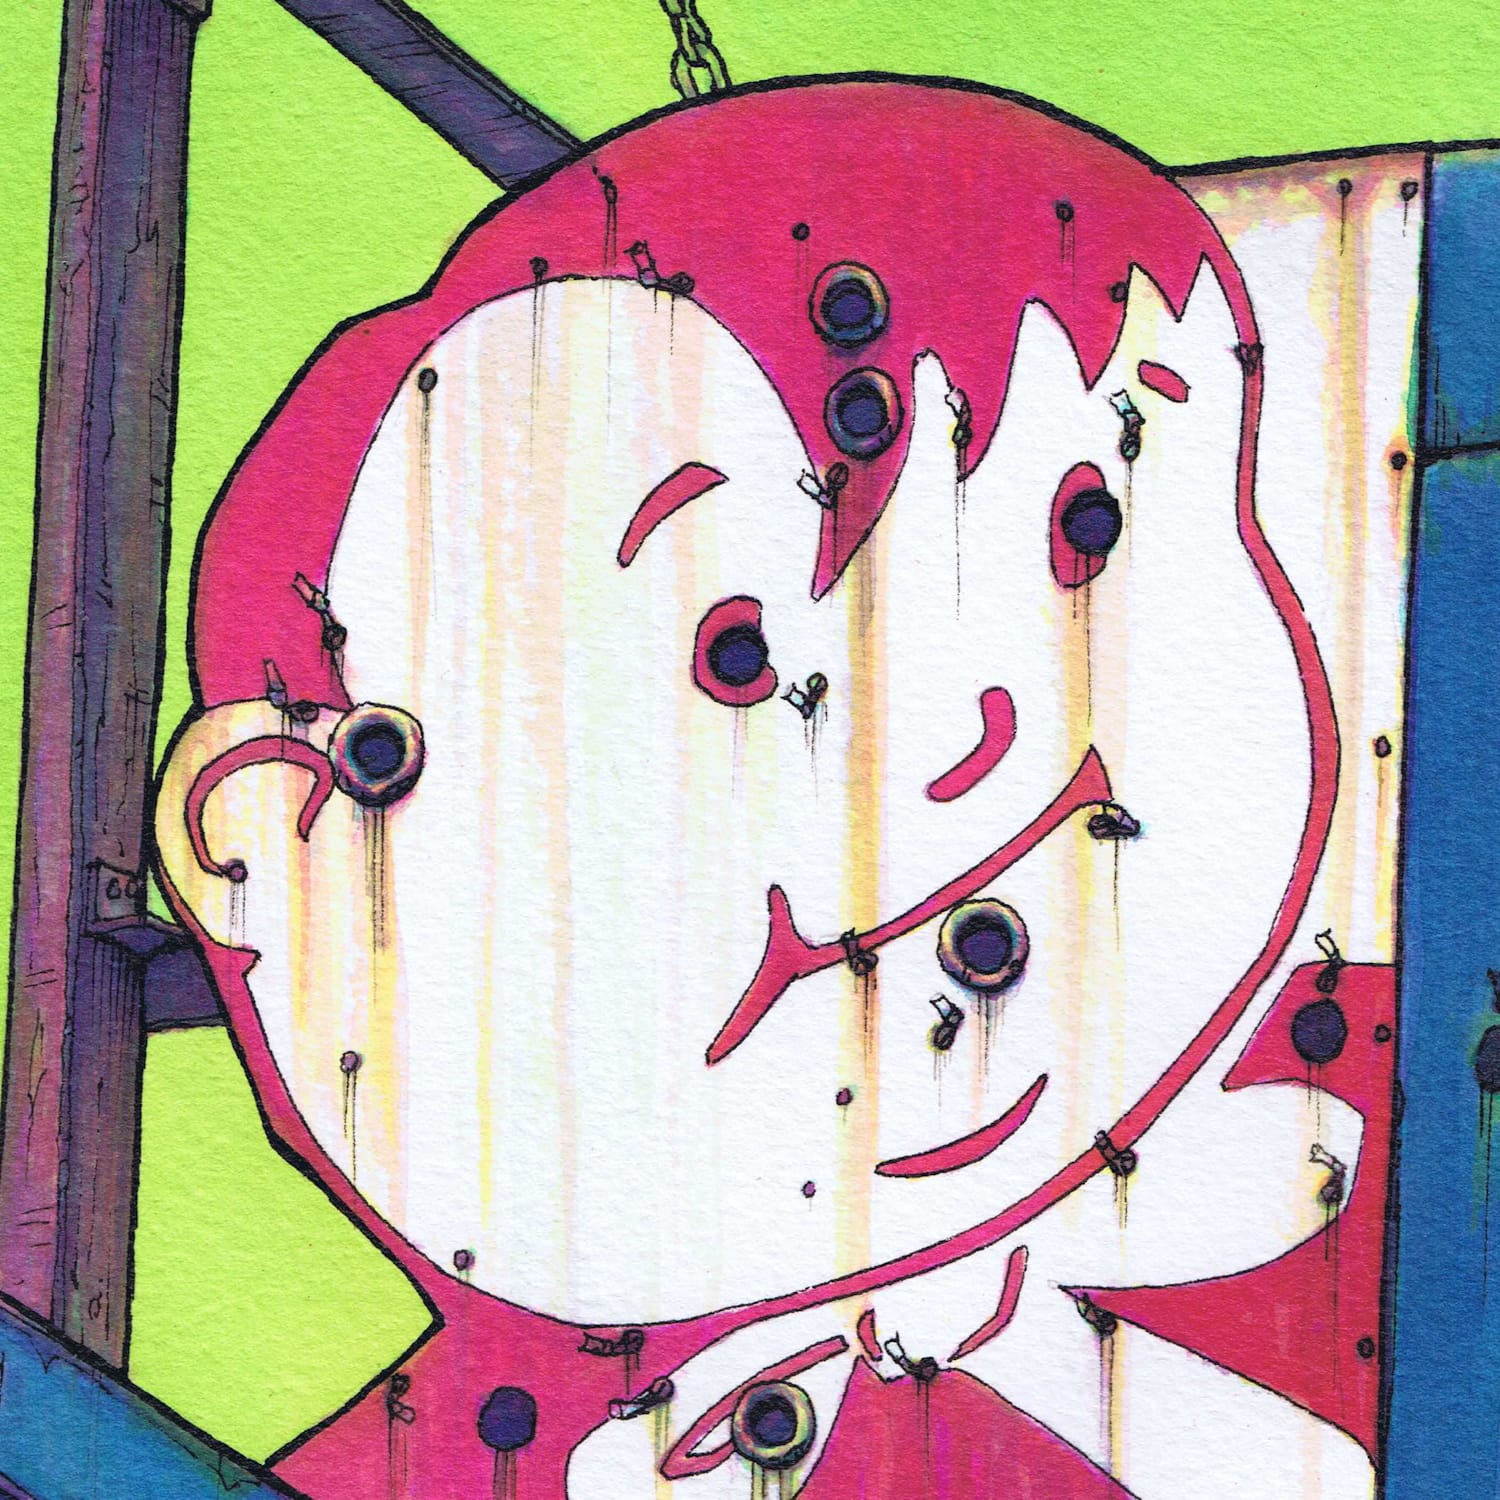 Painting of a decaying sign that consists of a pictorial element of a fat boy in a cartoon style.